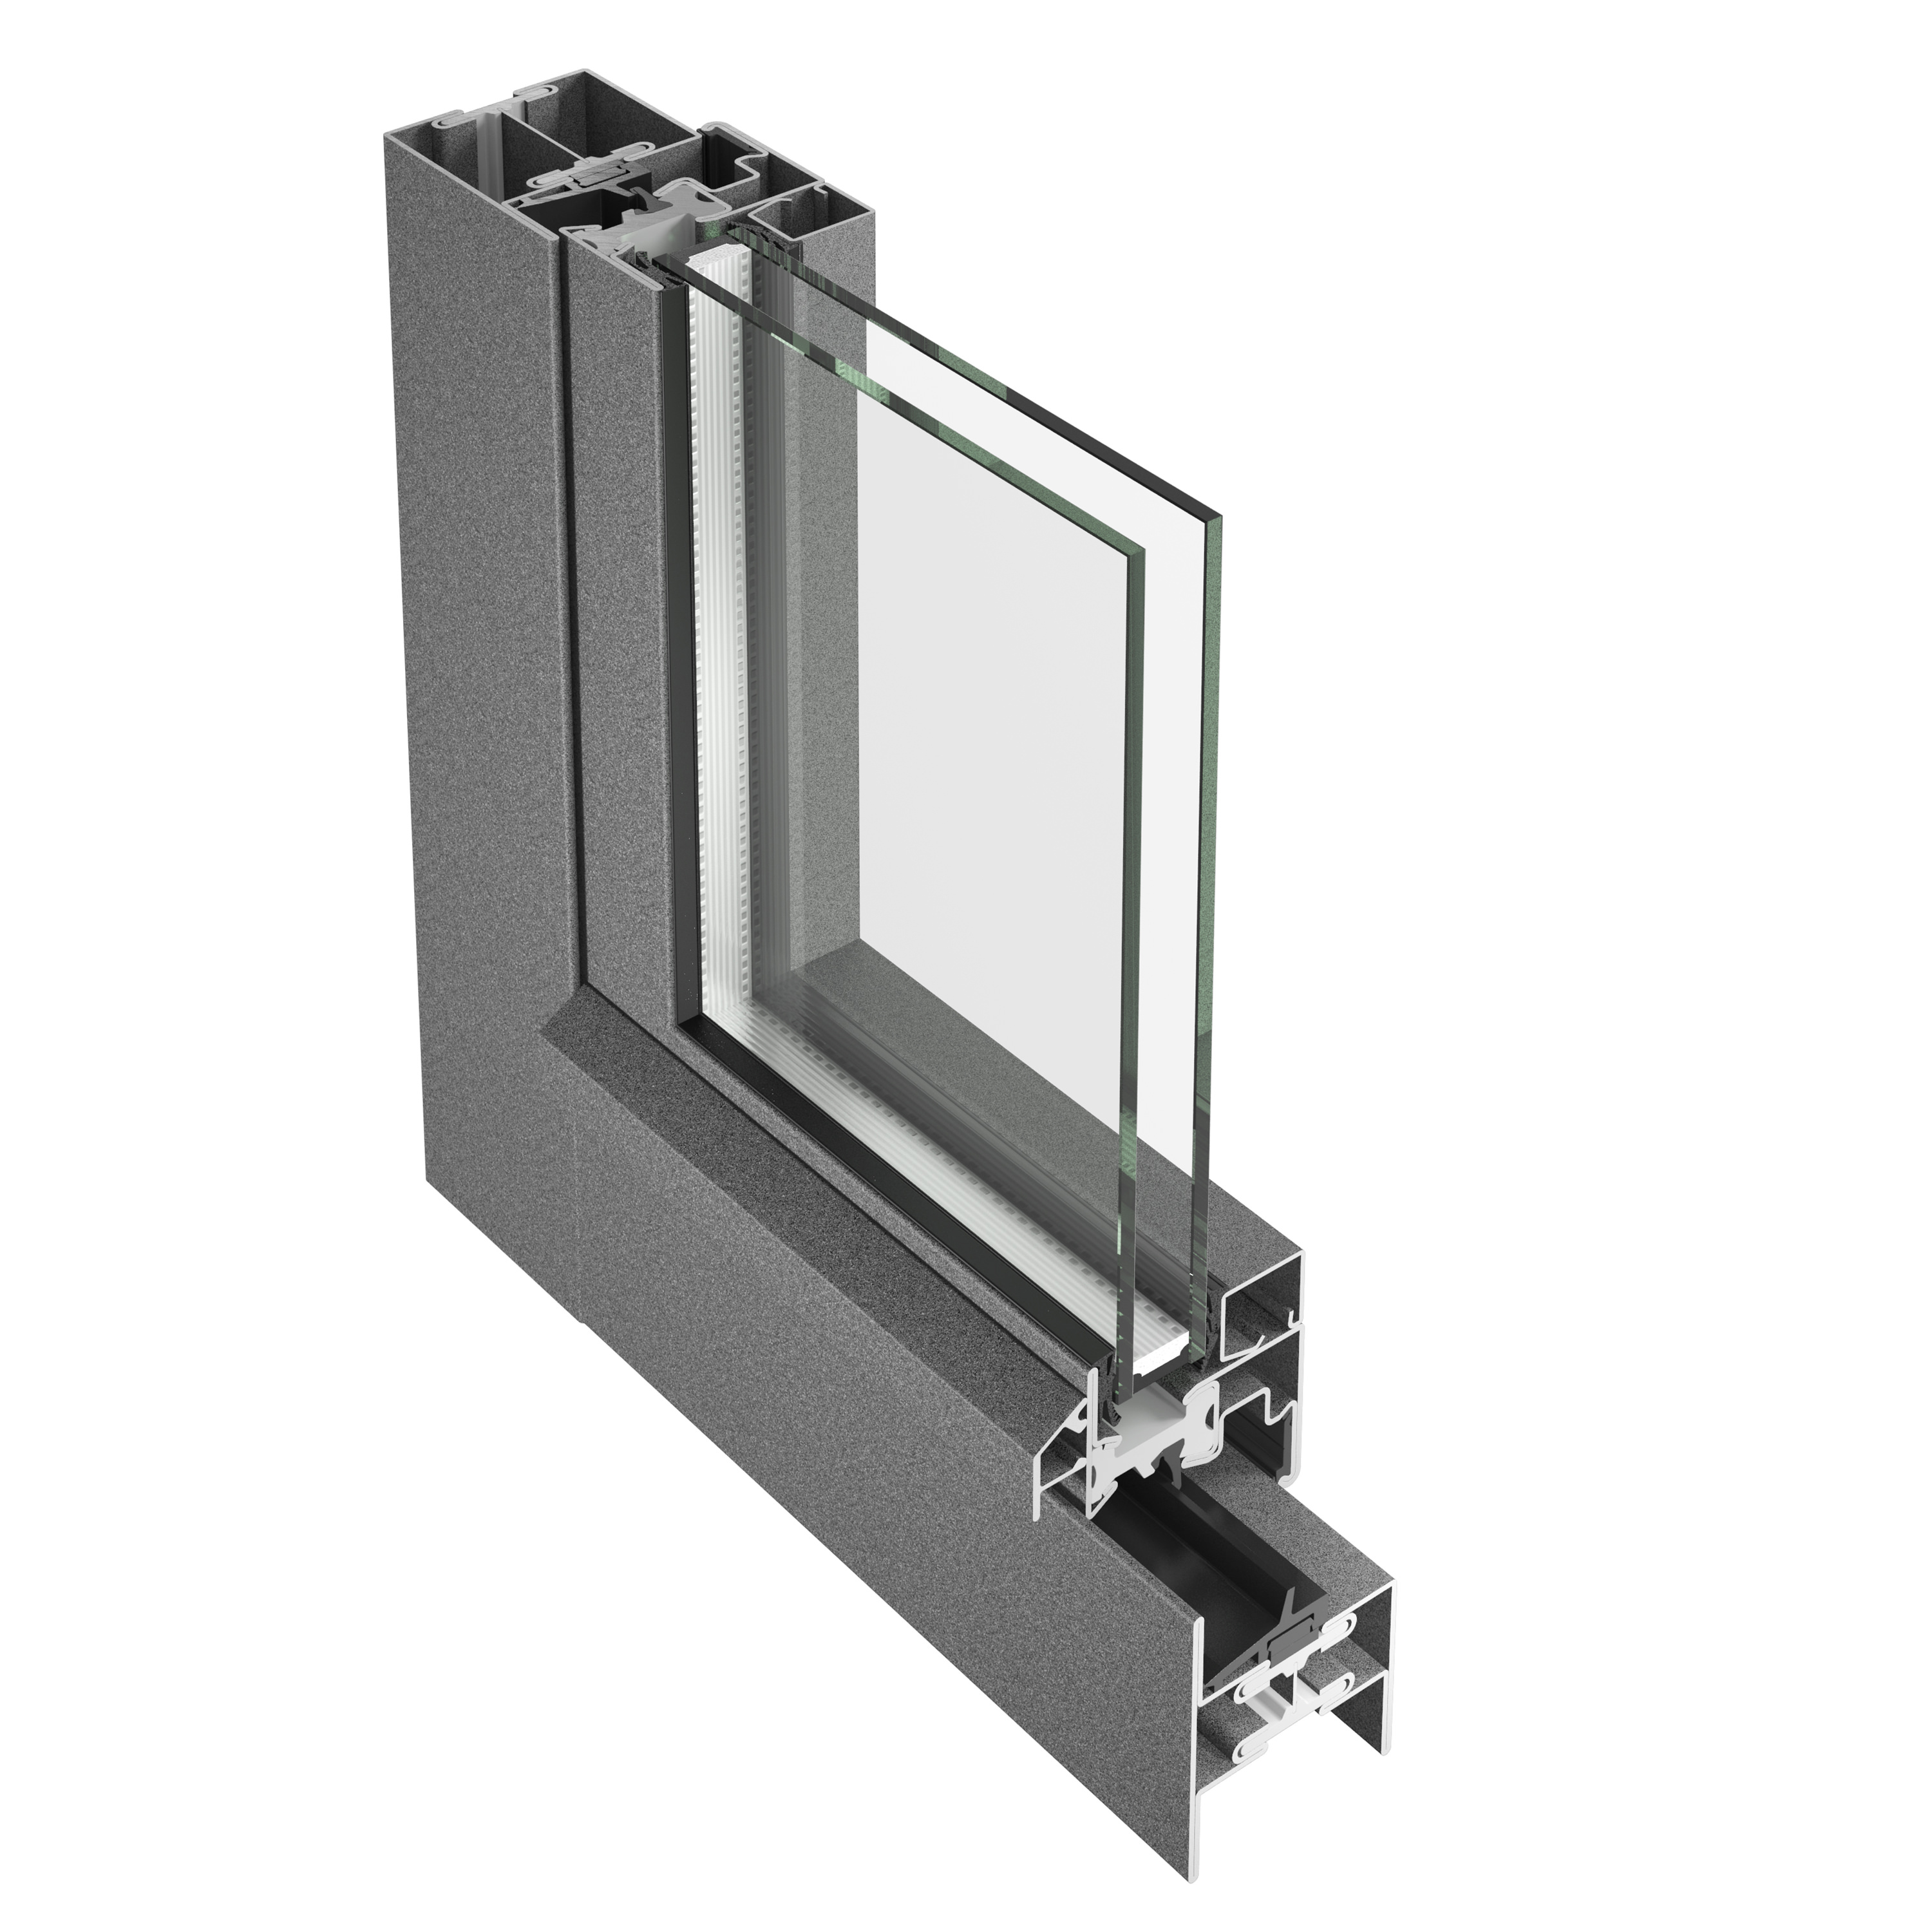 Janisol steel and stainless steel windows